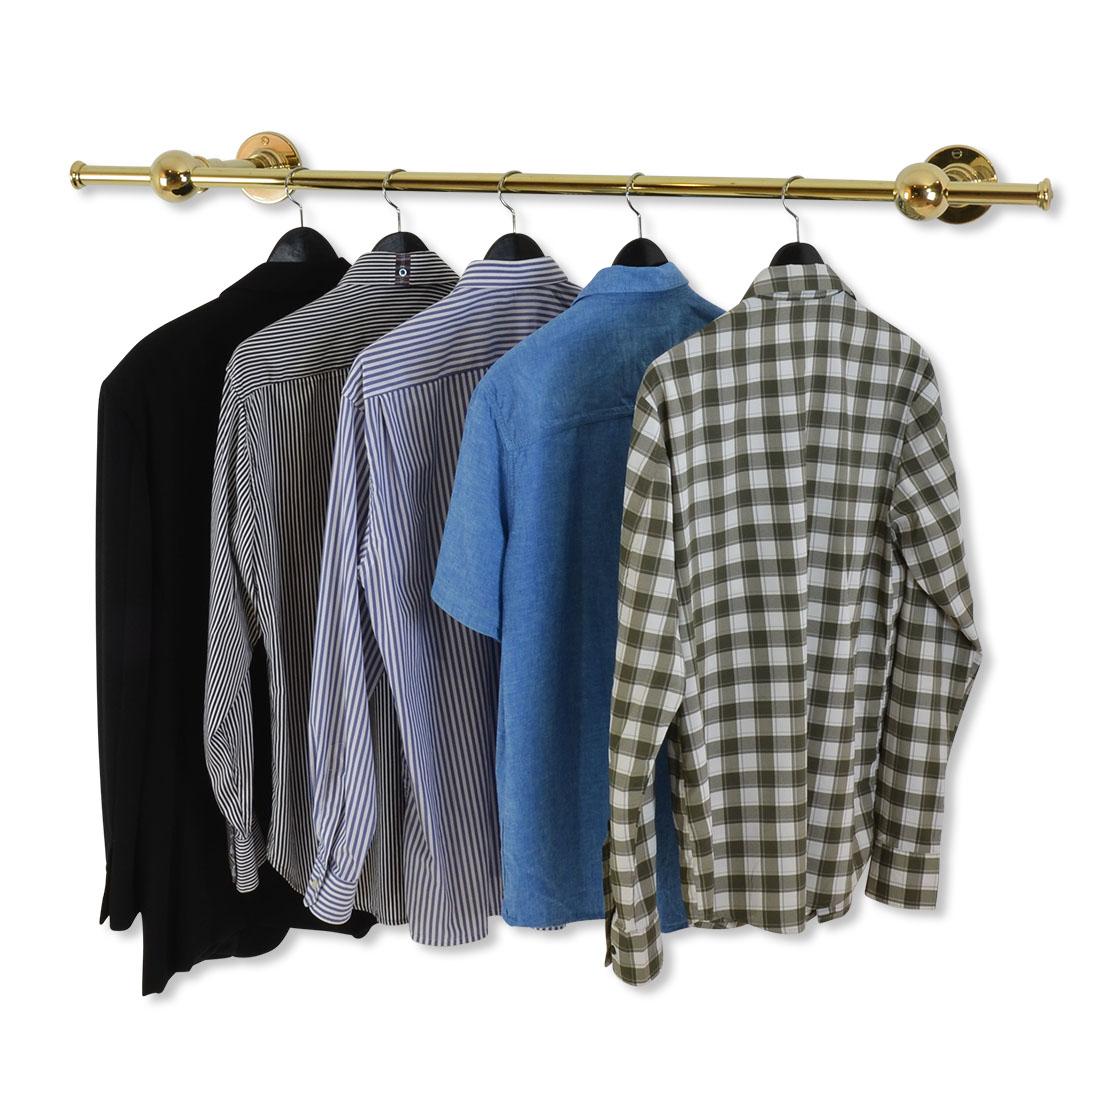 brass wall mounted clothes rail